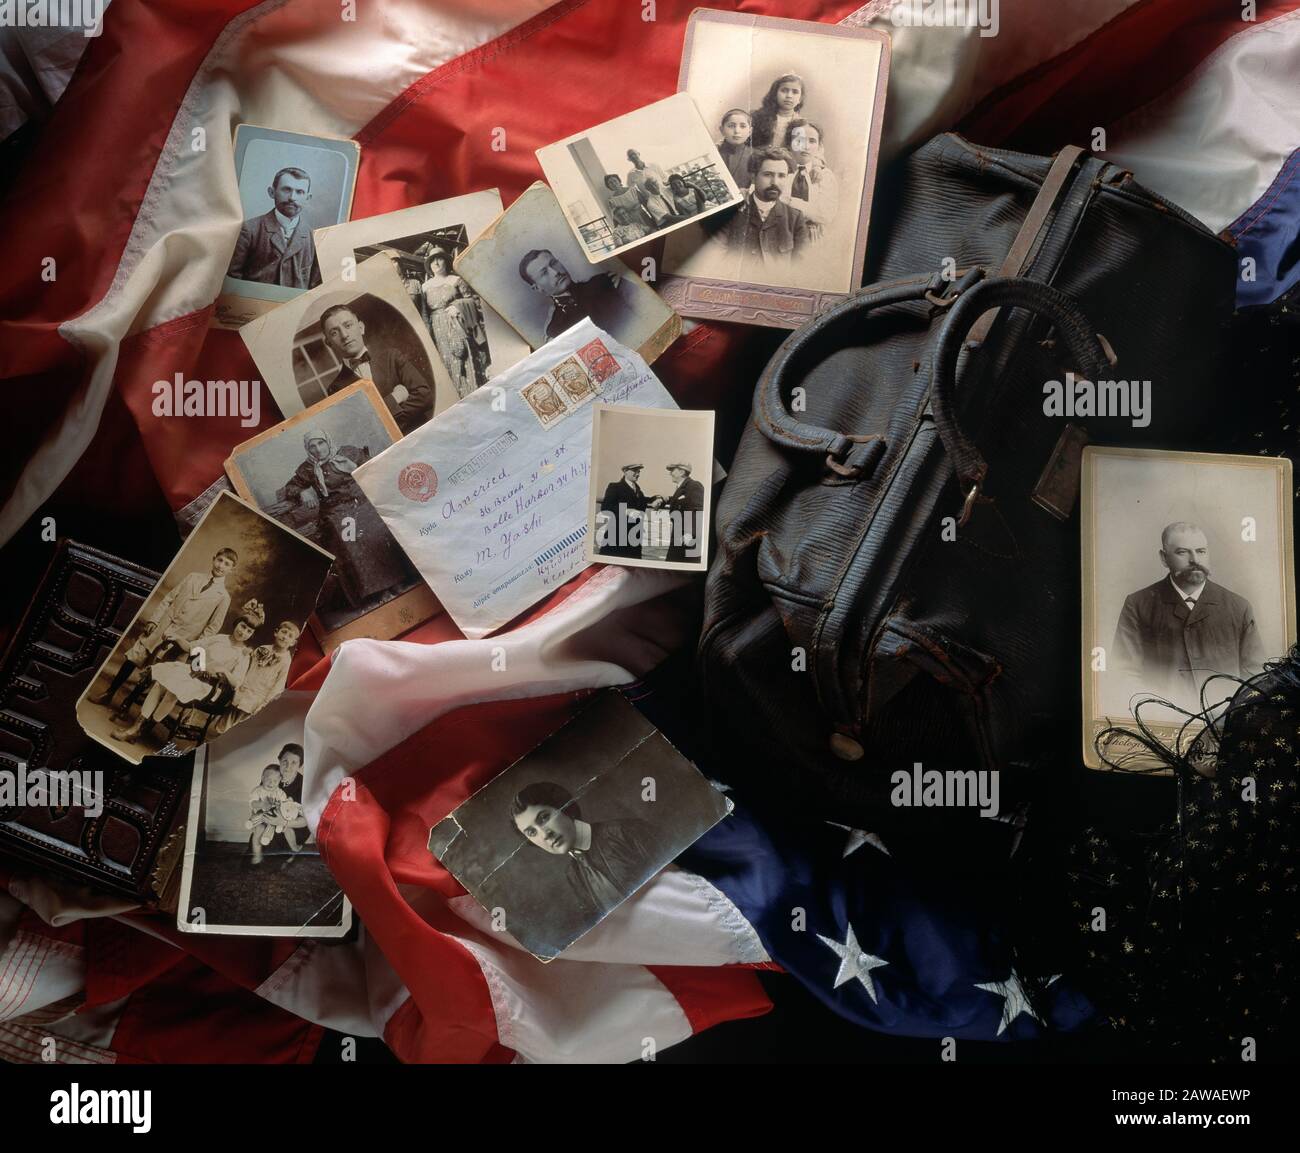 Still life of immigration papers, photos, and an American flag Stock Photo